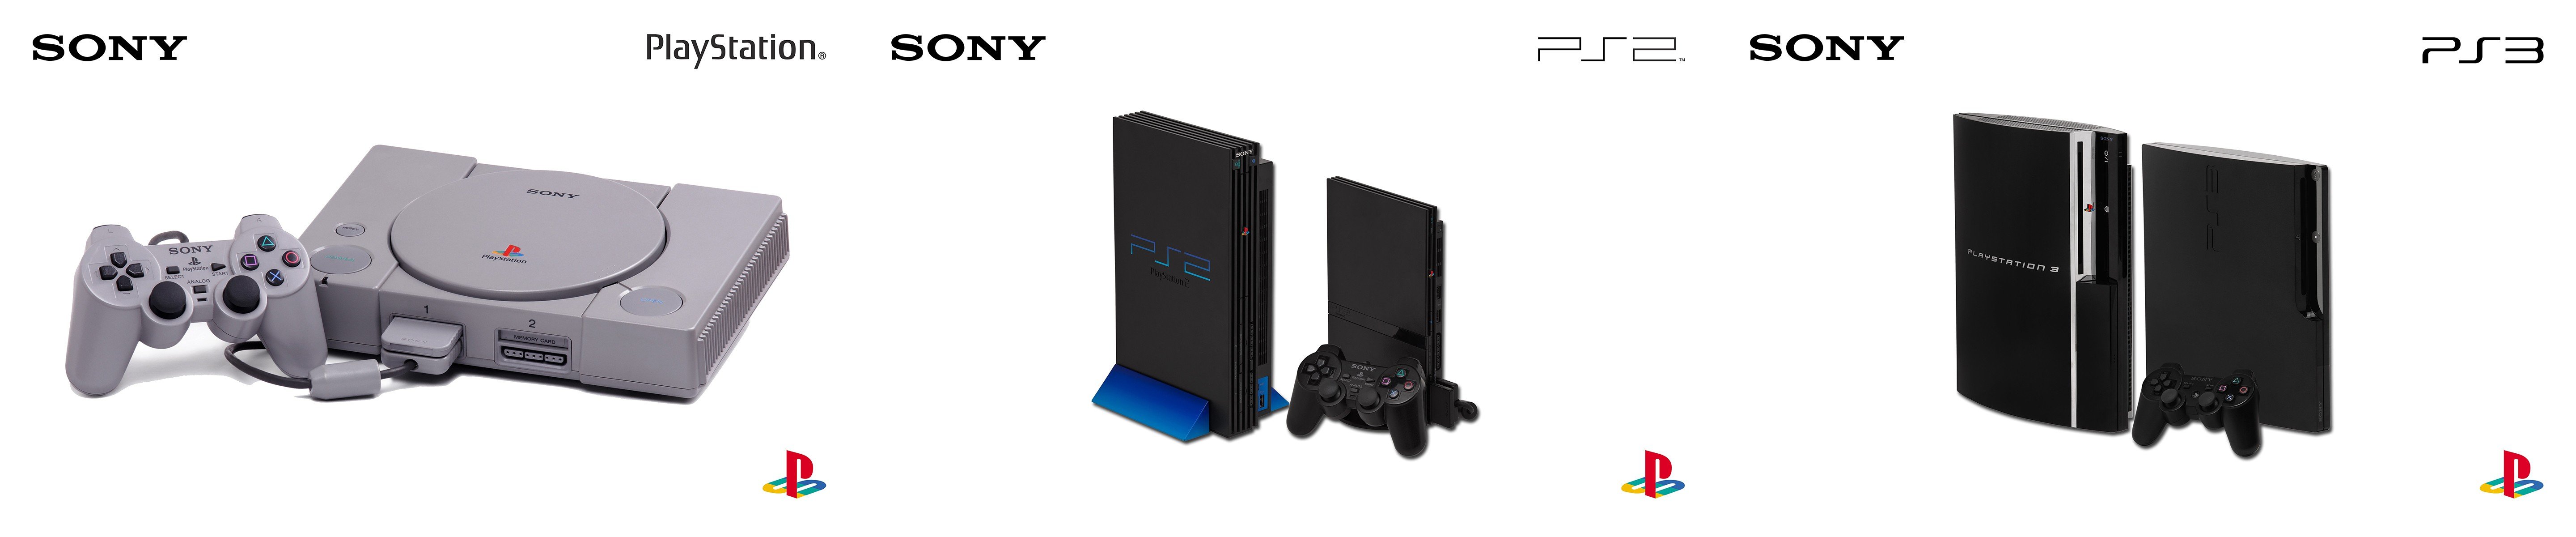 PlayStation, PlayStation 2, PlayStation 3, Triple screen, Sony, Simple background Wallpaper